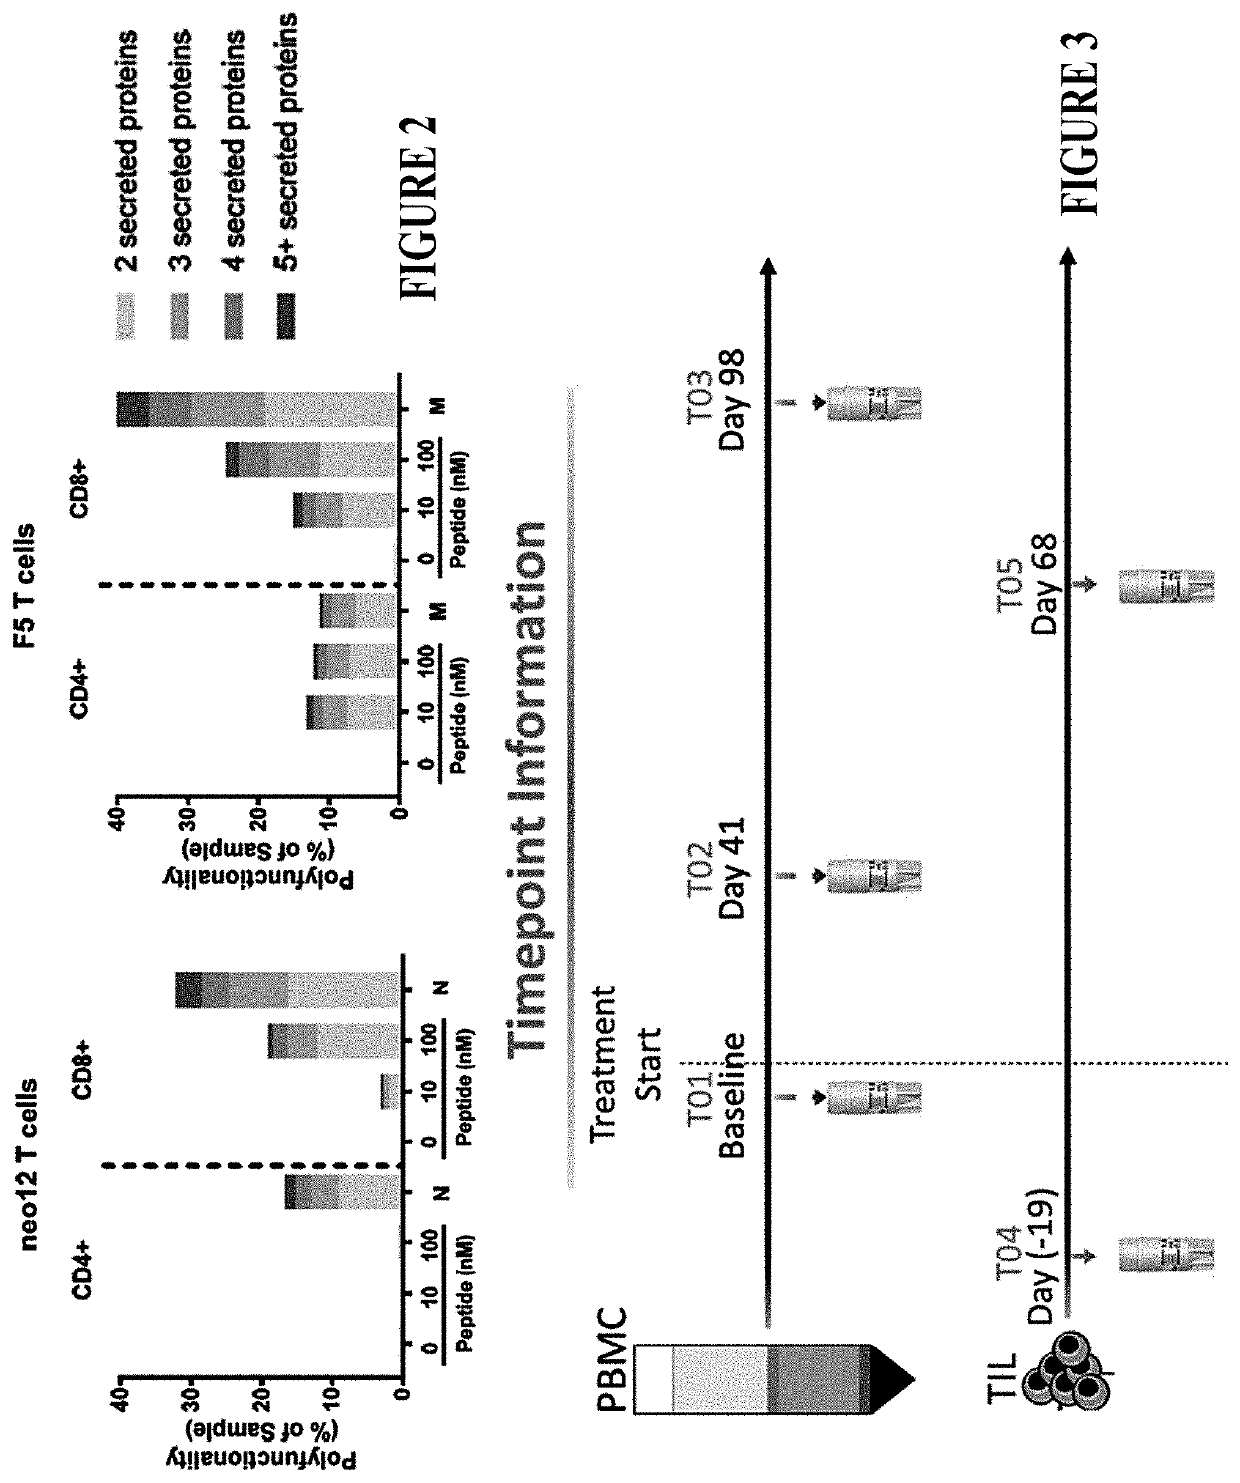 Methods of treatment using a genetically modified autologous t cell immunotherapy